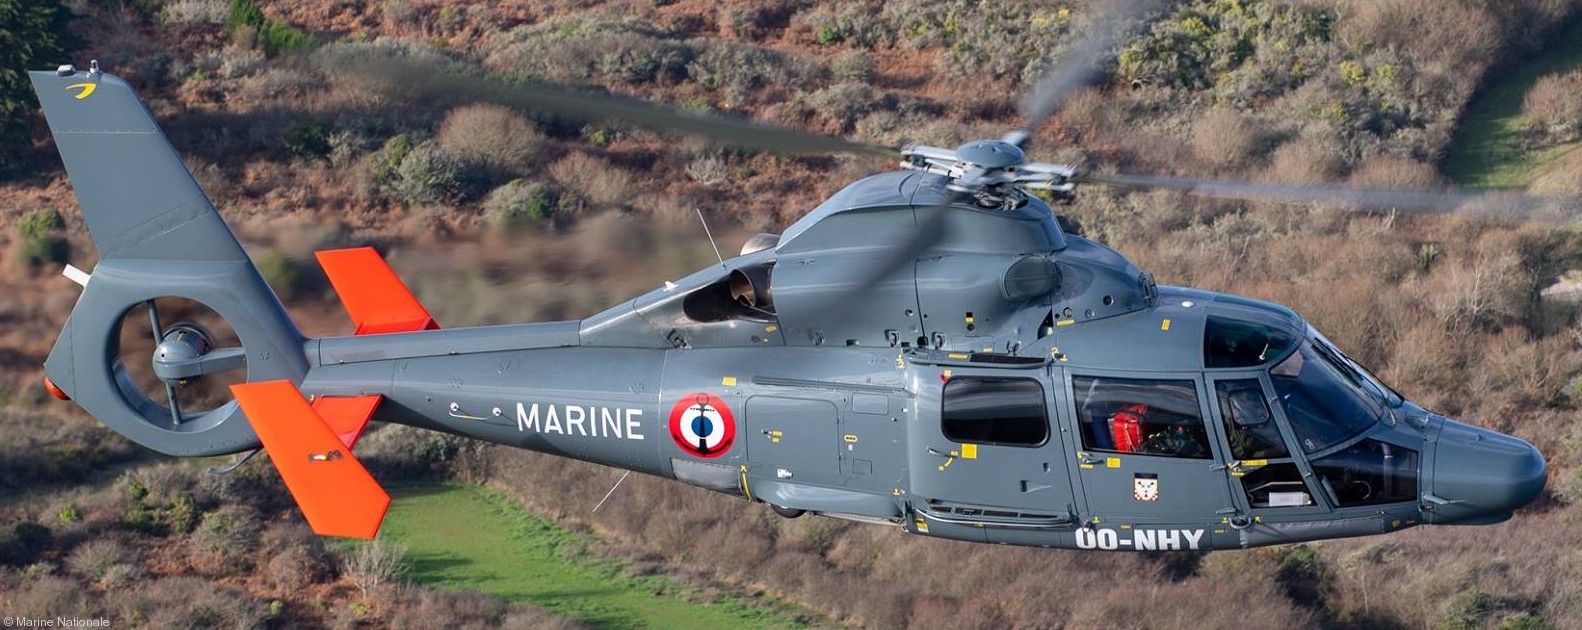 as365n3 dauphin helicopter escadrille 22s french navy marine nationale 00-nhy